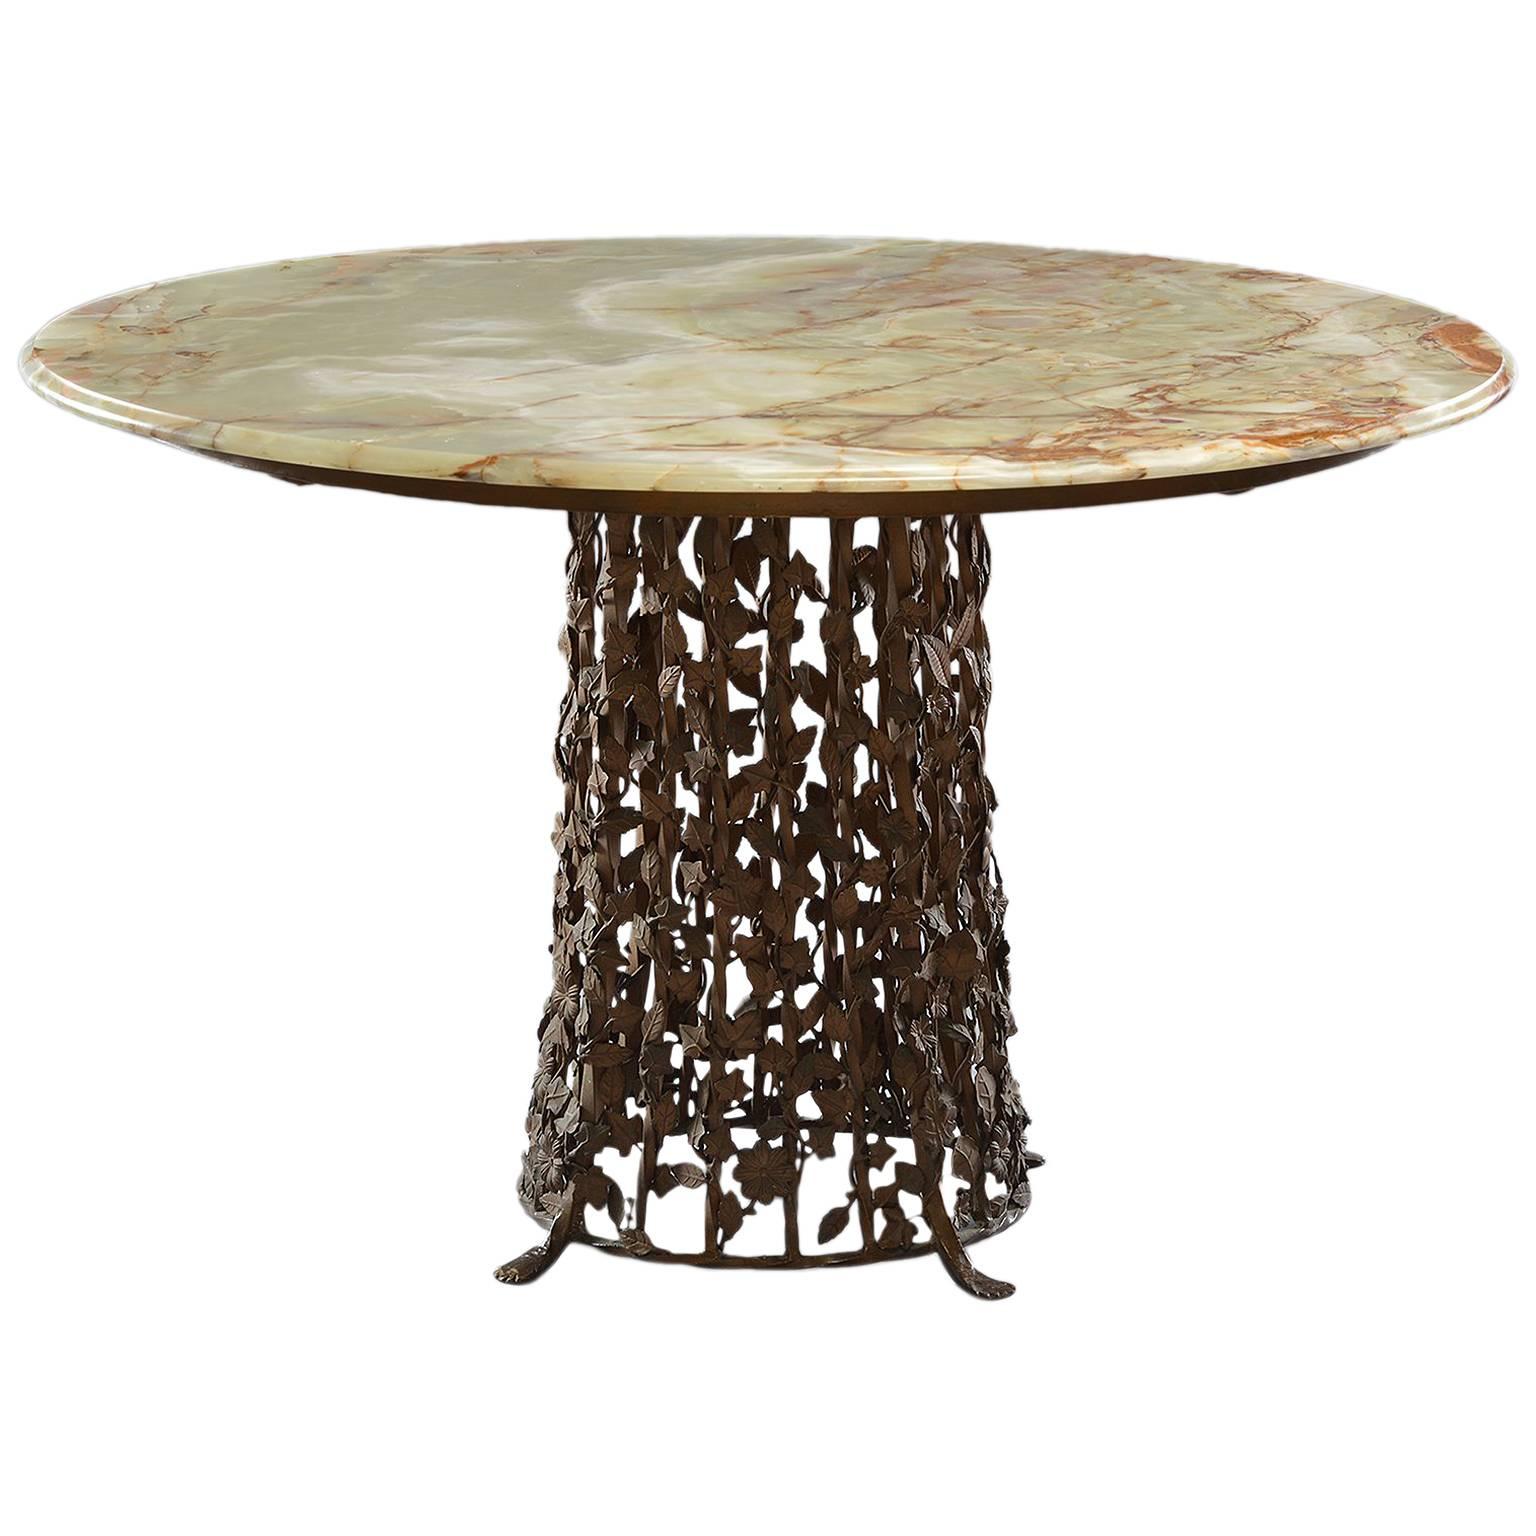 Italian Centre Table with Brass Base of Leaves and Onyx Top